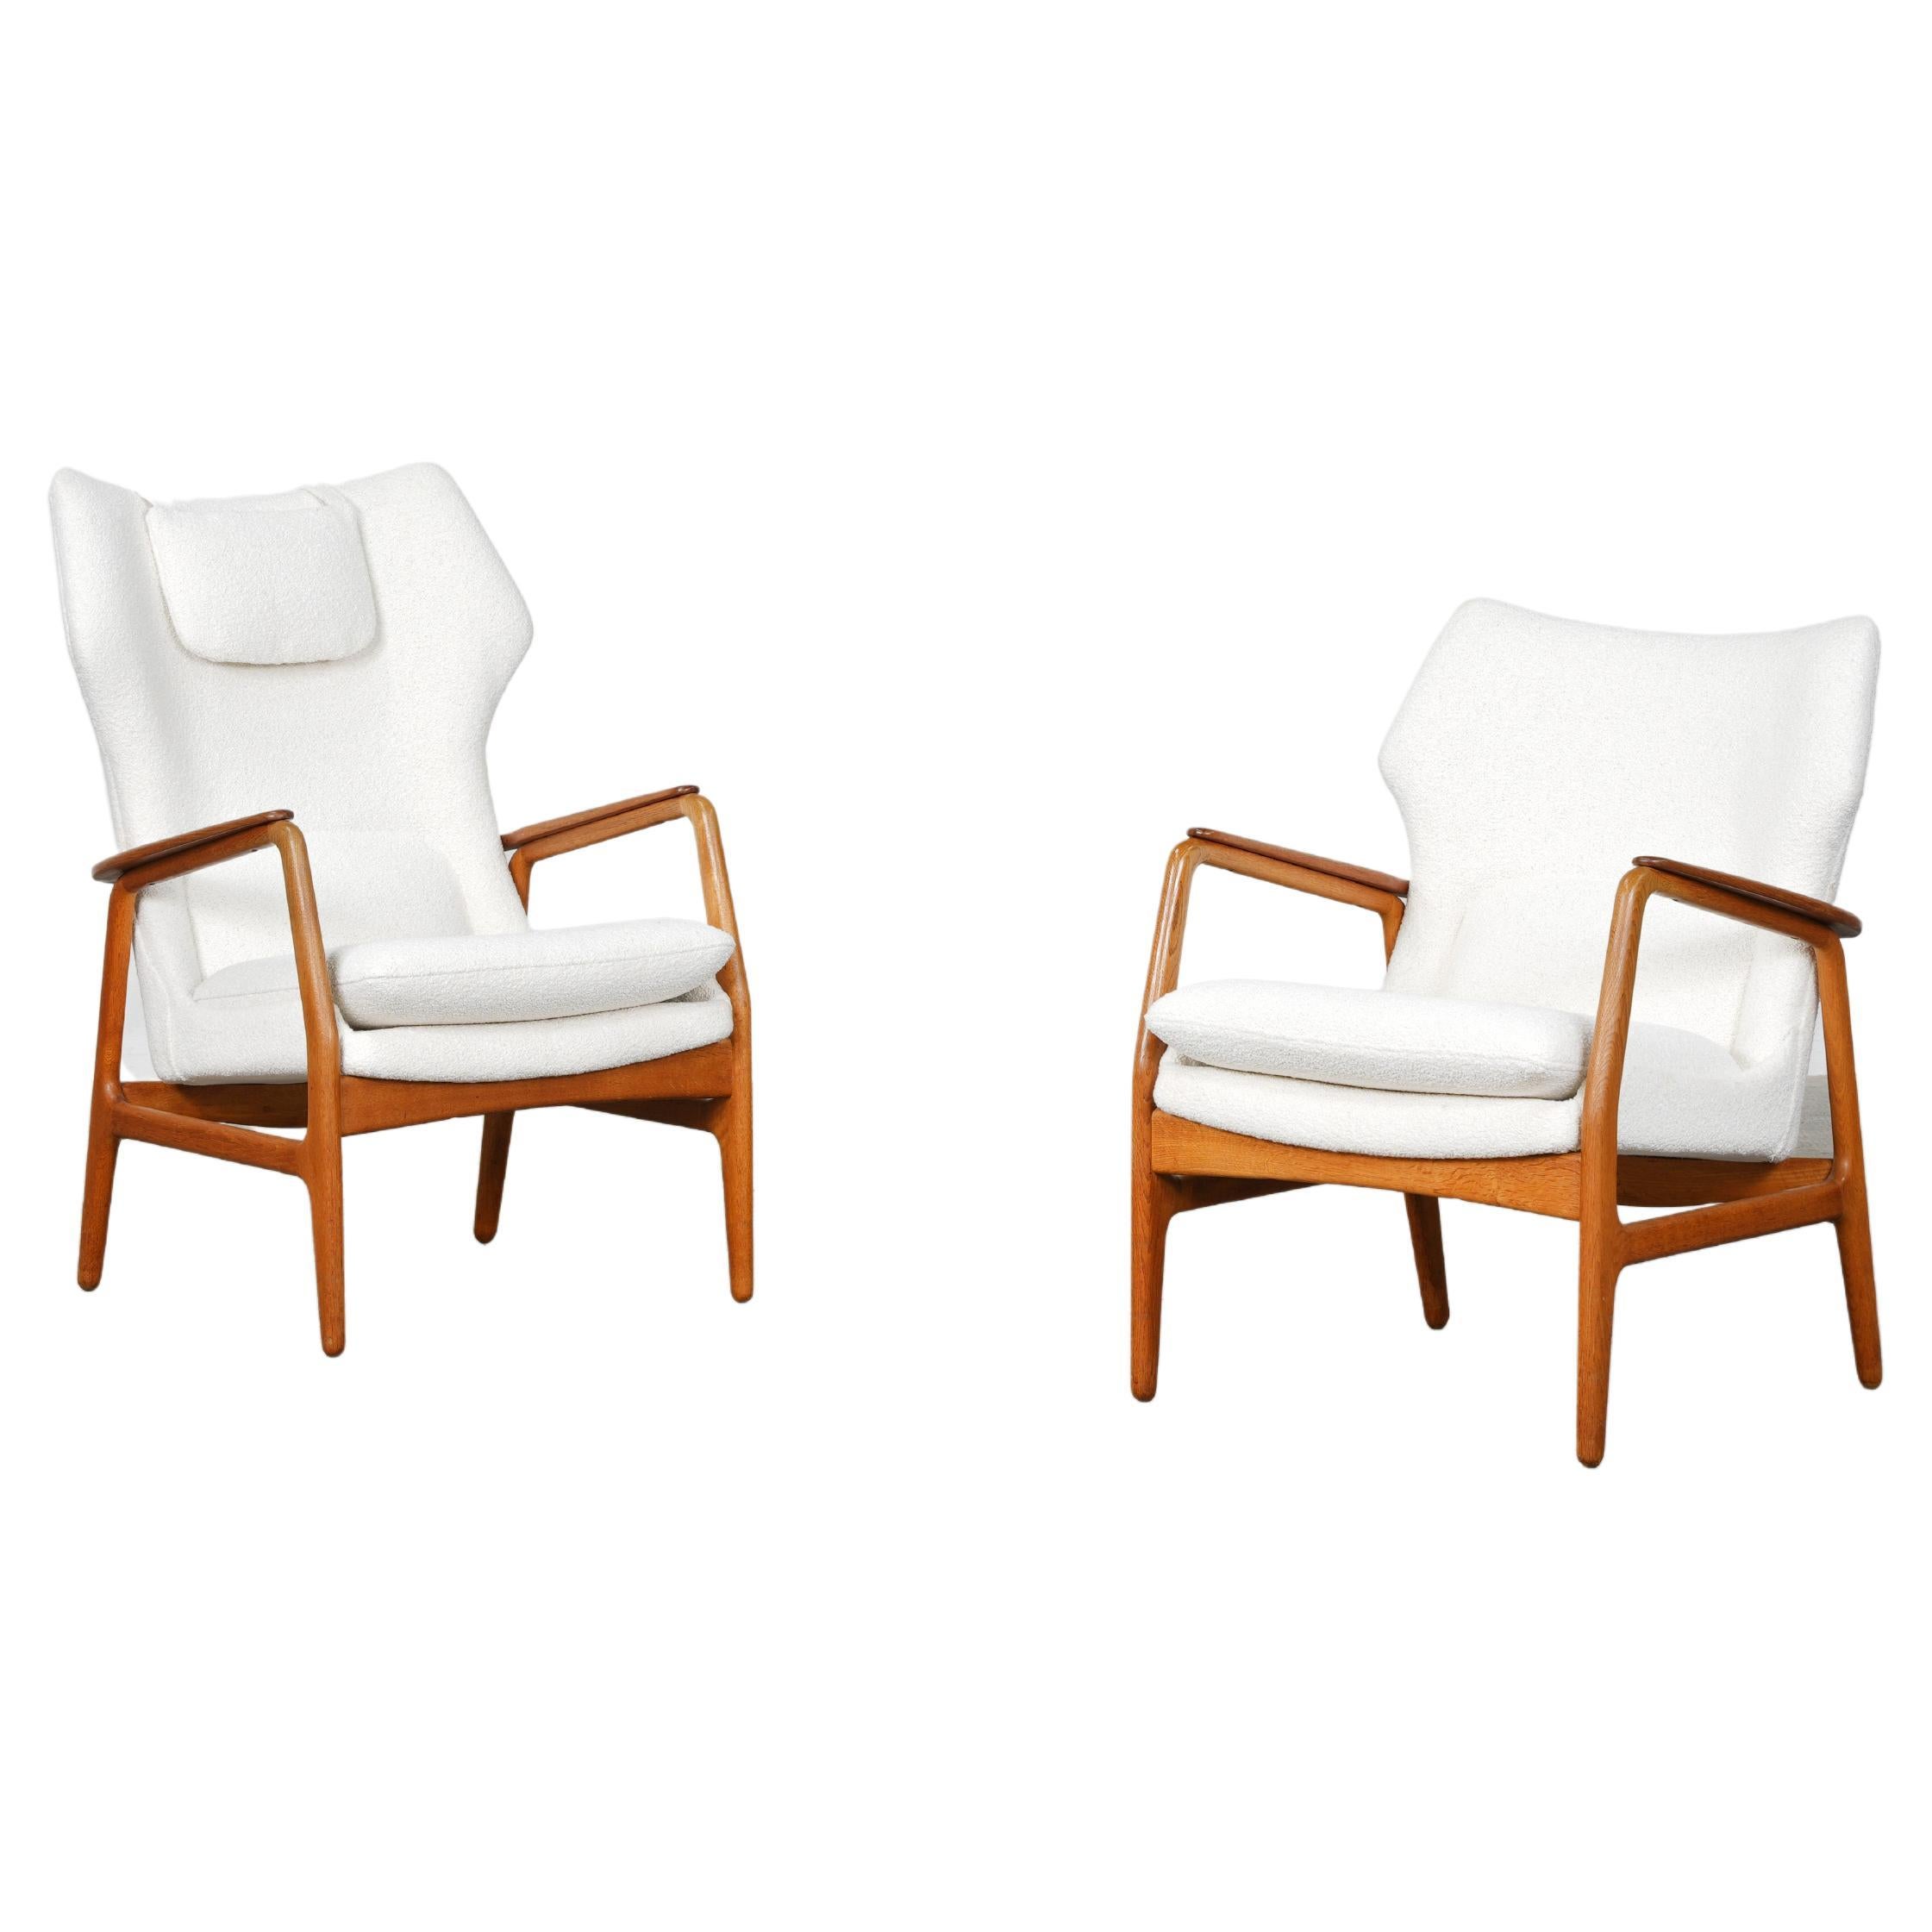 Pair of Lounge Chairs by IB Madsen & A. Schubell for Bovenkamp, 1954 For Sale